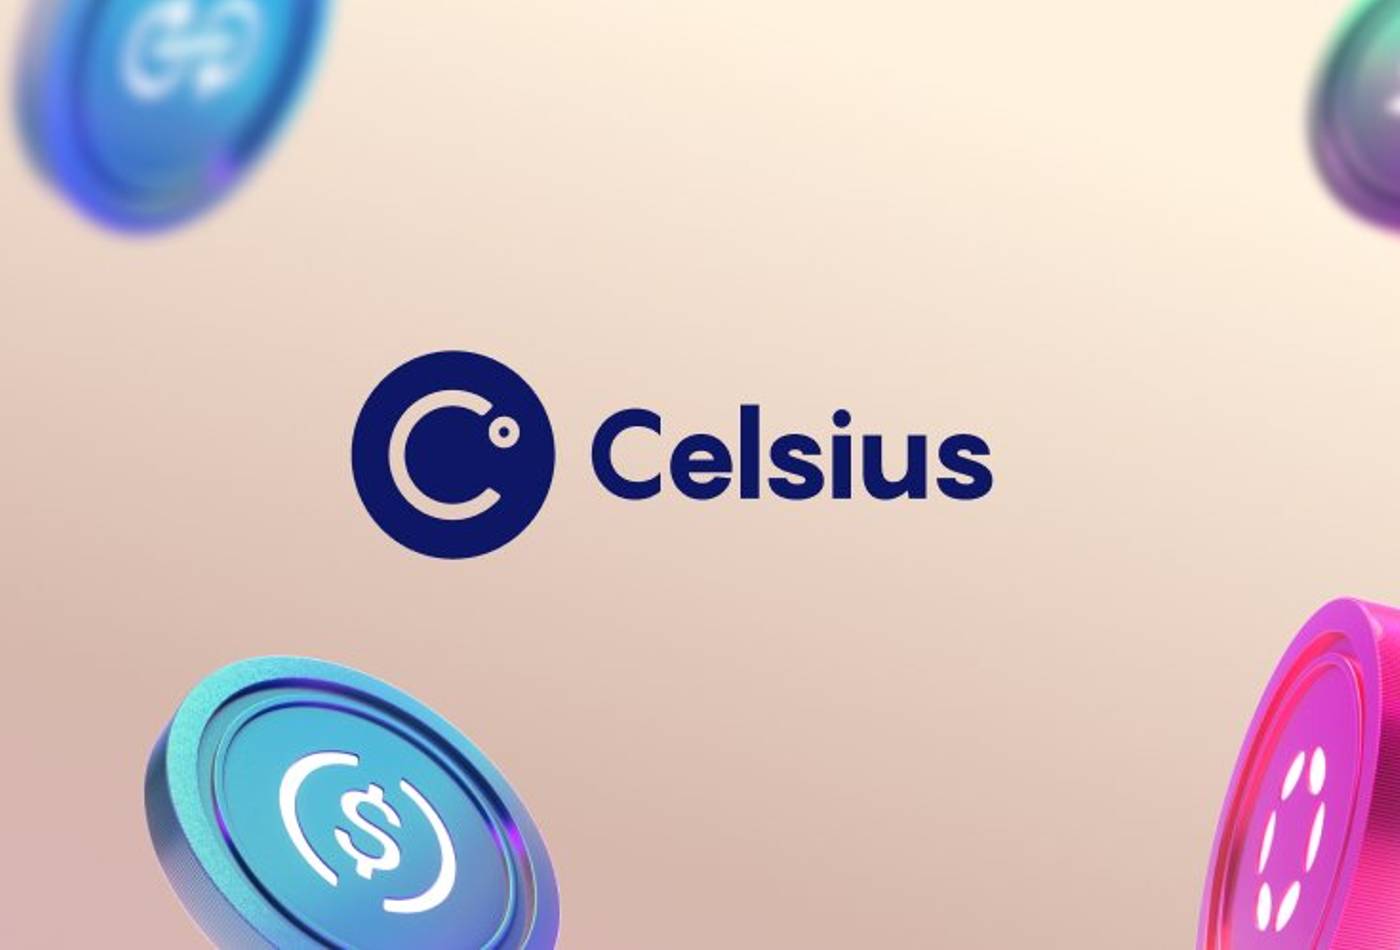 Celsius (CEL) Price Prediction 2022-2030: The Most Realistic Analysis